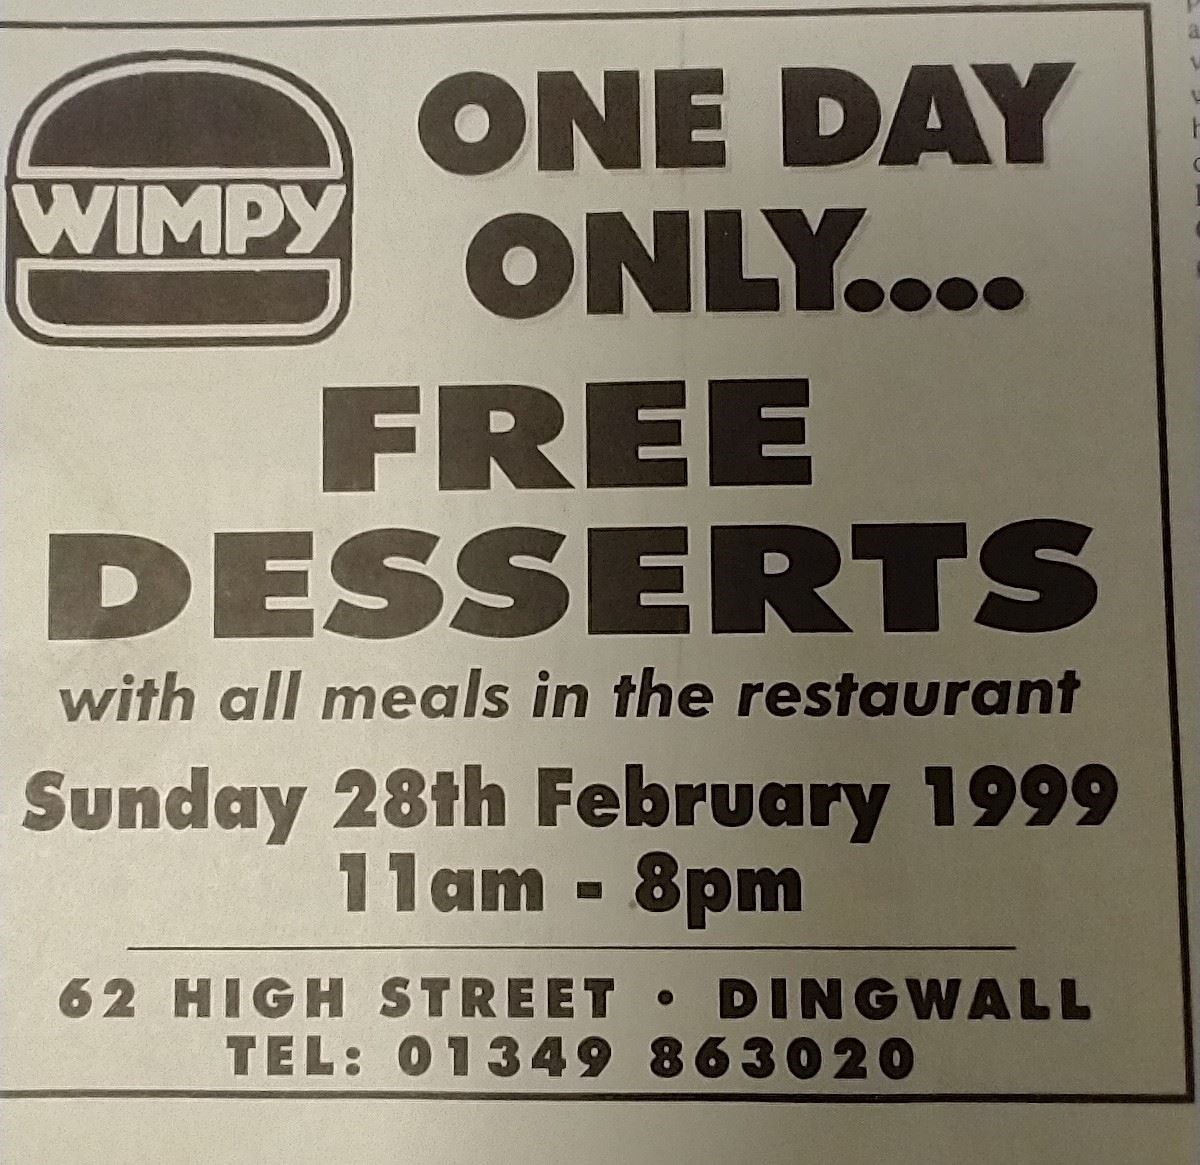 Wimpy free desserts ad from 1999.